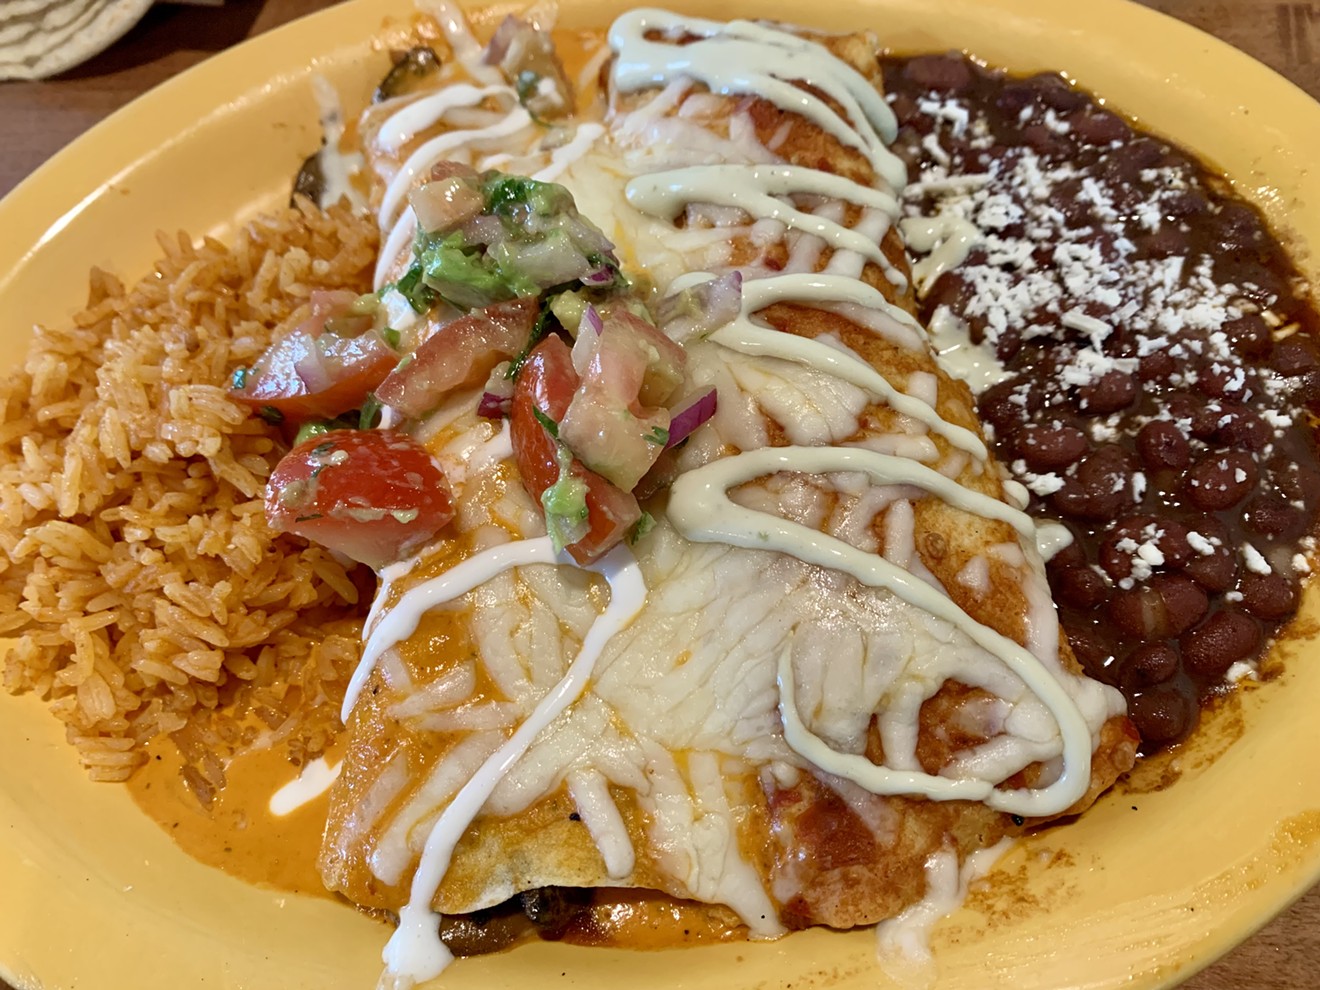 Enchiladas filled with beef birria and wild mushrooms at Cocina Madrigal.